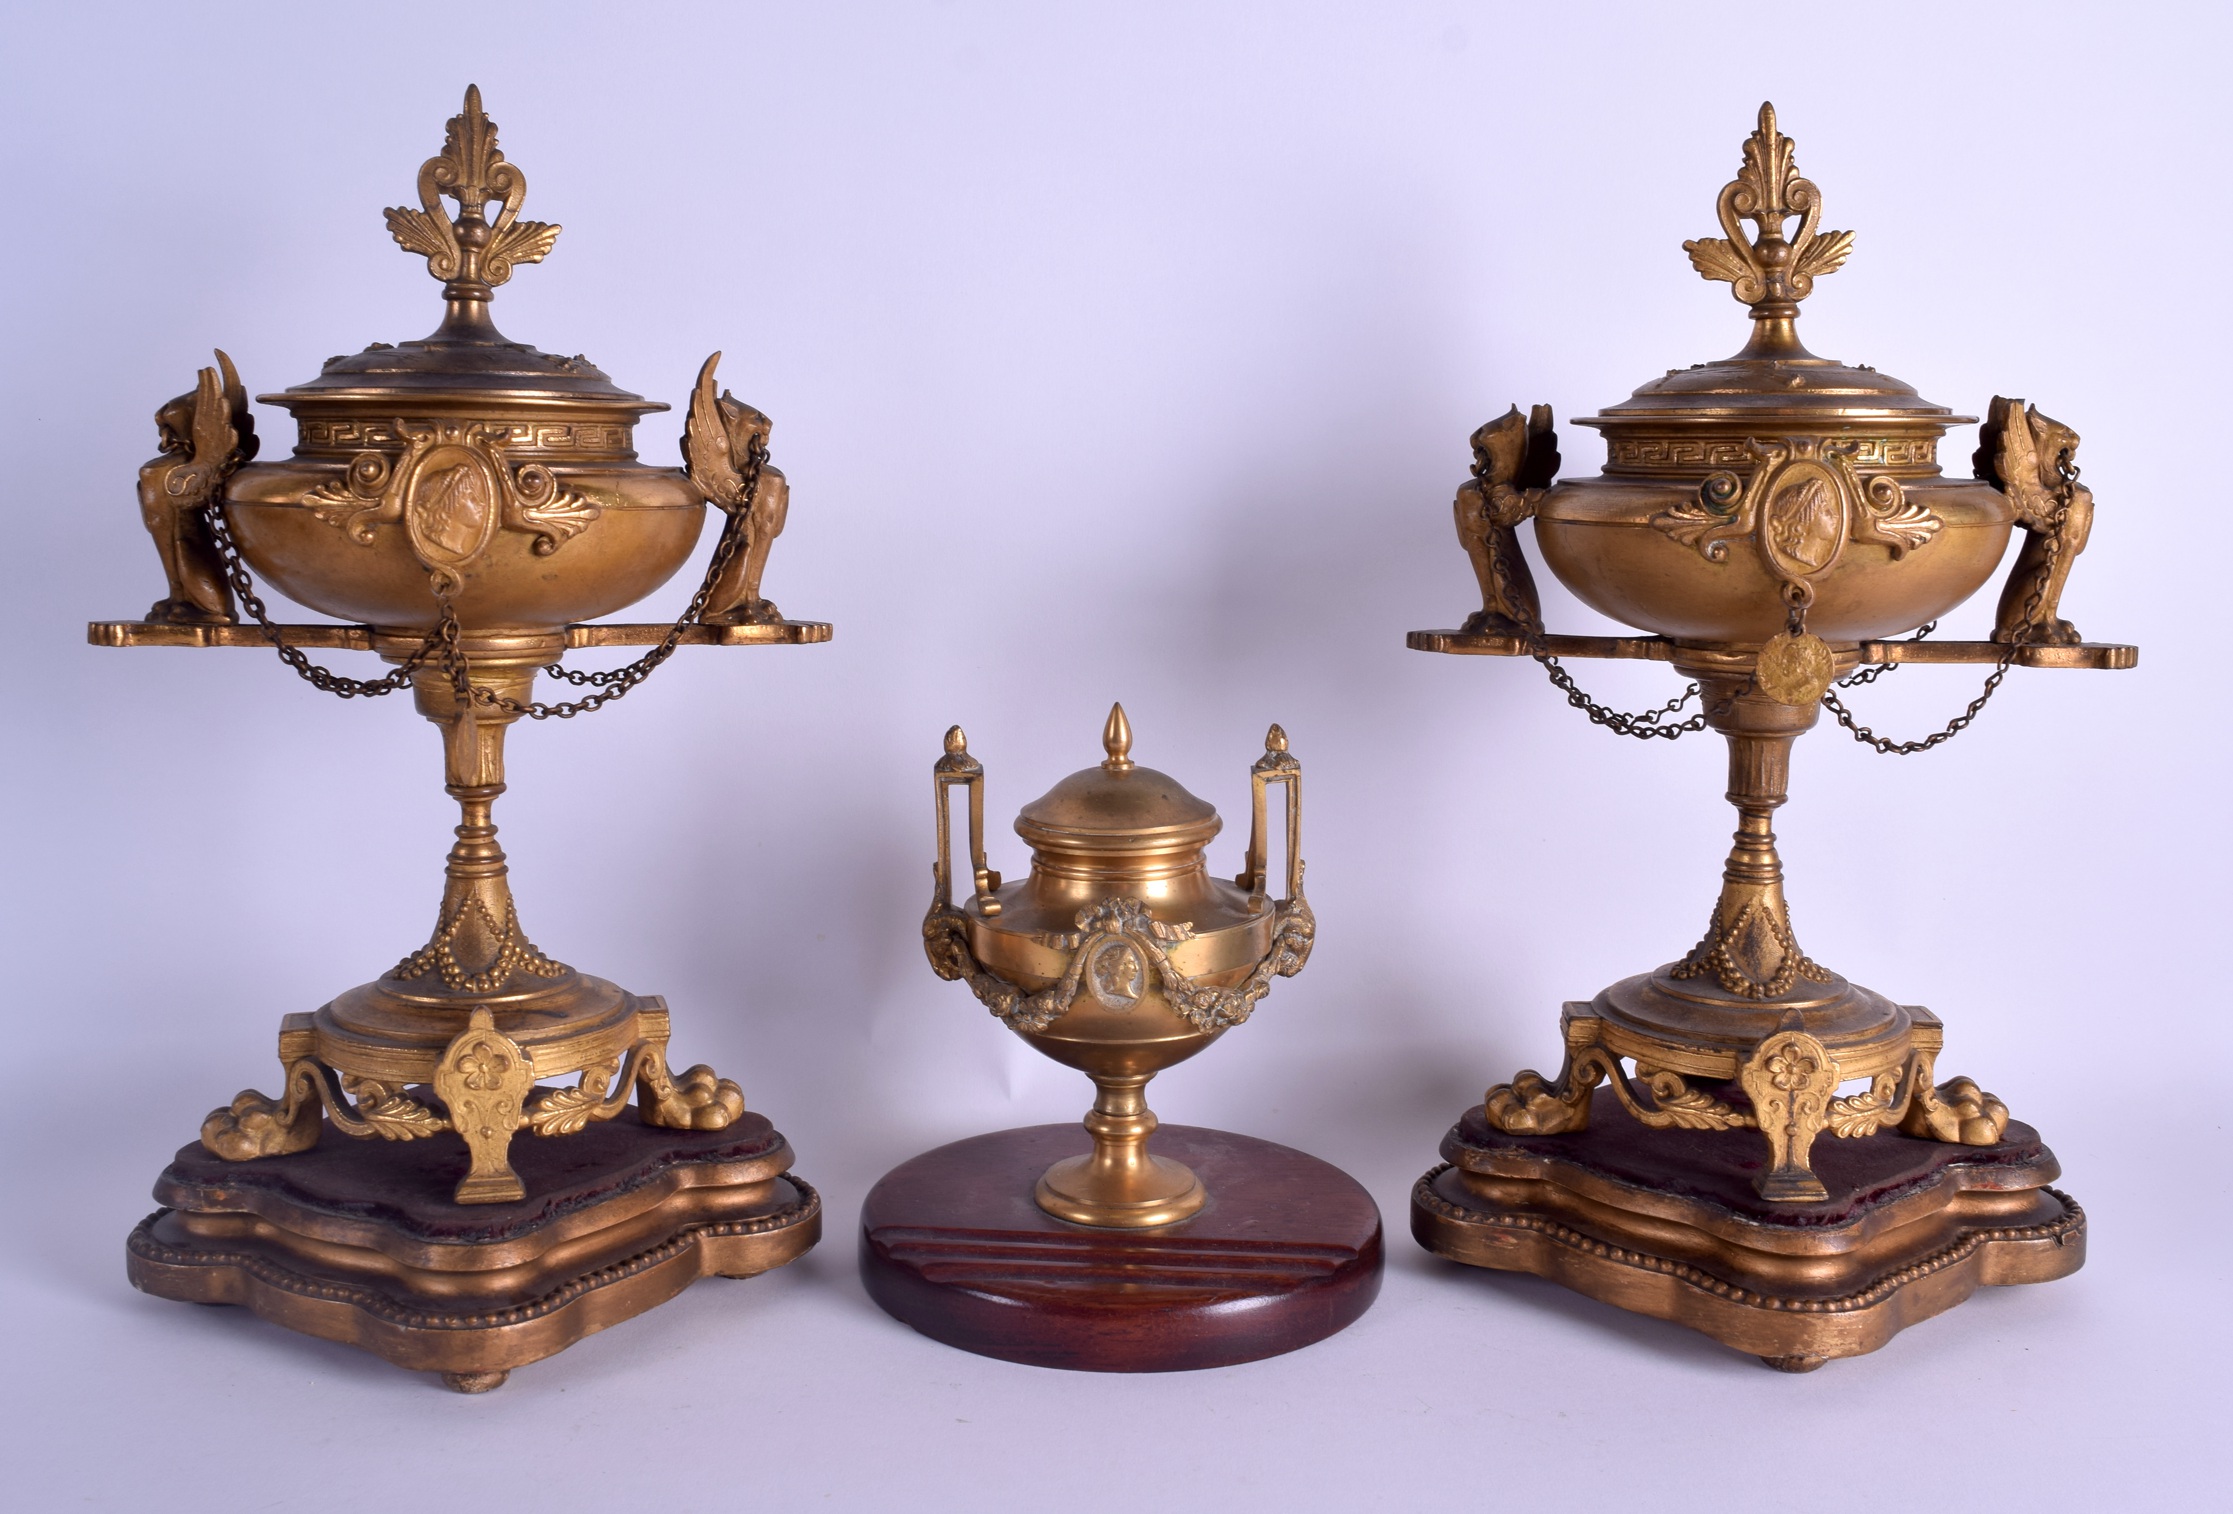 A 19TH CENTURY FRENCH GILT METAL MANTEL GARNITURE formed with two griffin mounts urns & a smaller